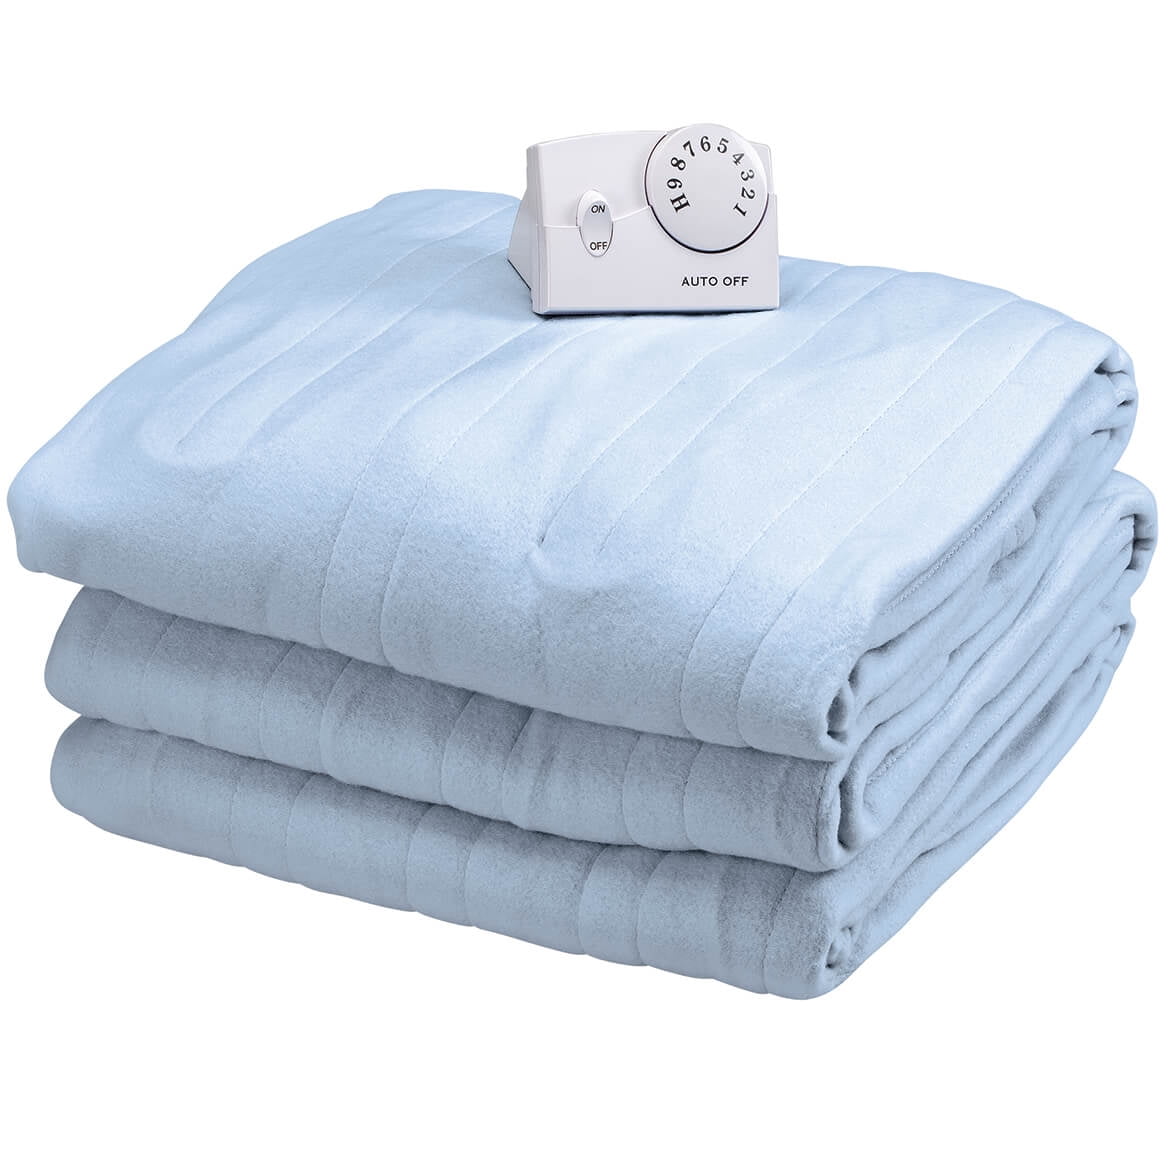 Homehours Faraday Blanket for Sleeping, Big Size 50IN * 60IN 127CM * 152CM  Thick Faraday Blanket for Belly, Warm White Berber Fleece and Navy Blue  Flannel with Faraday Fabric